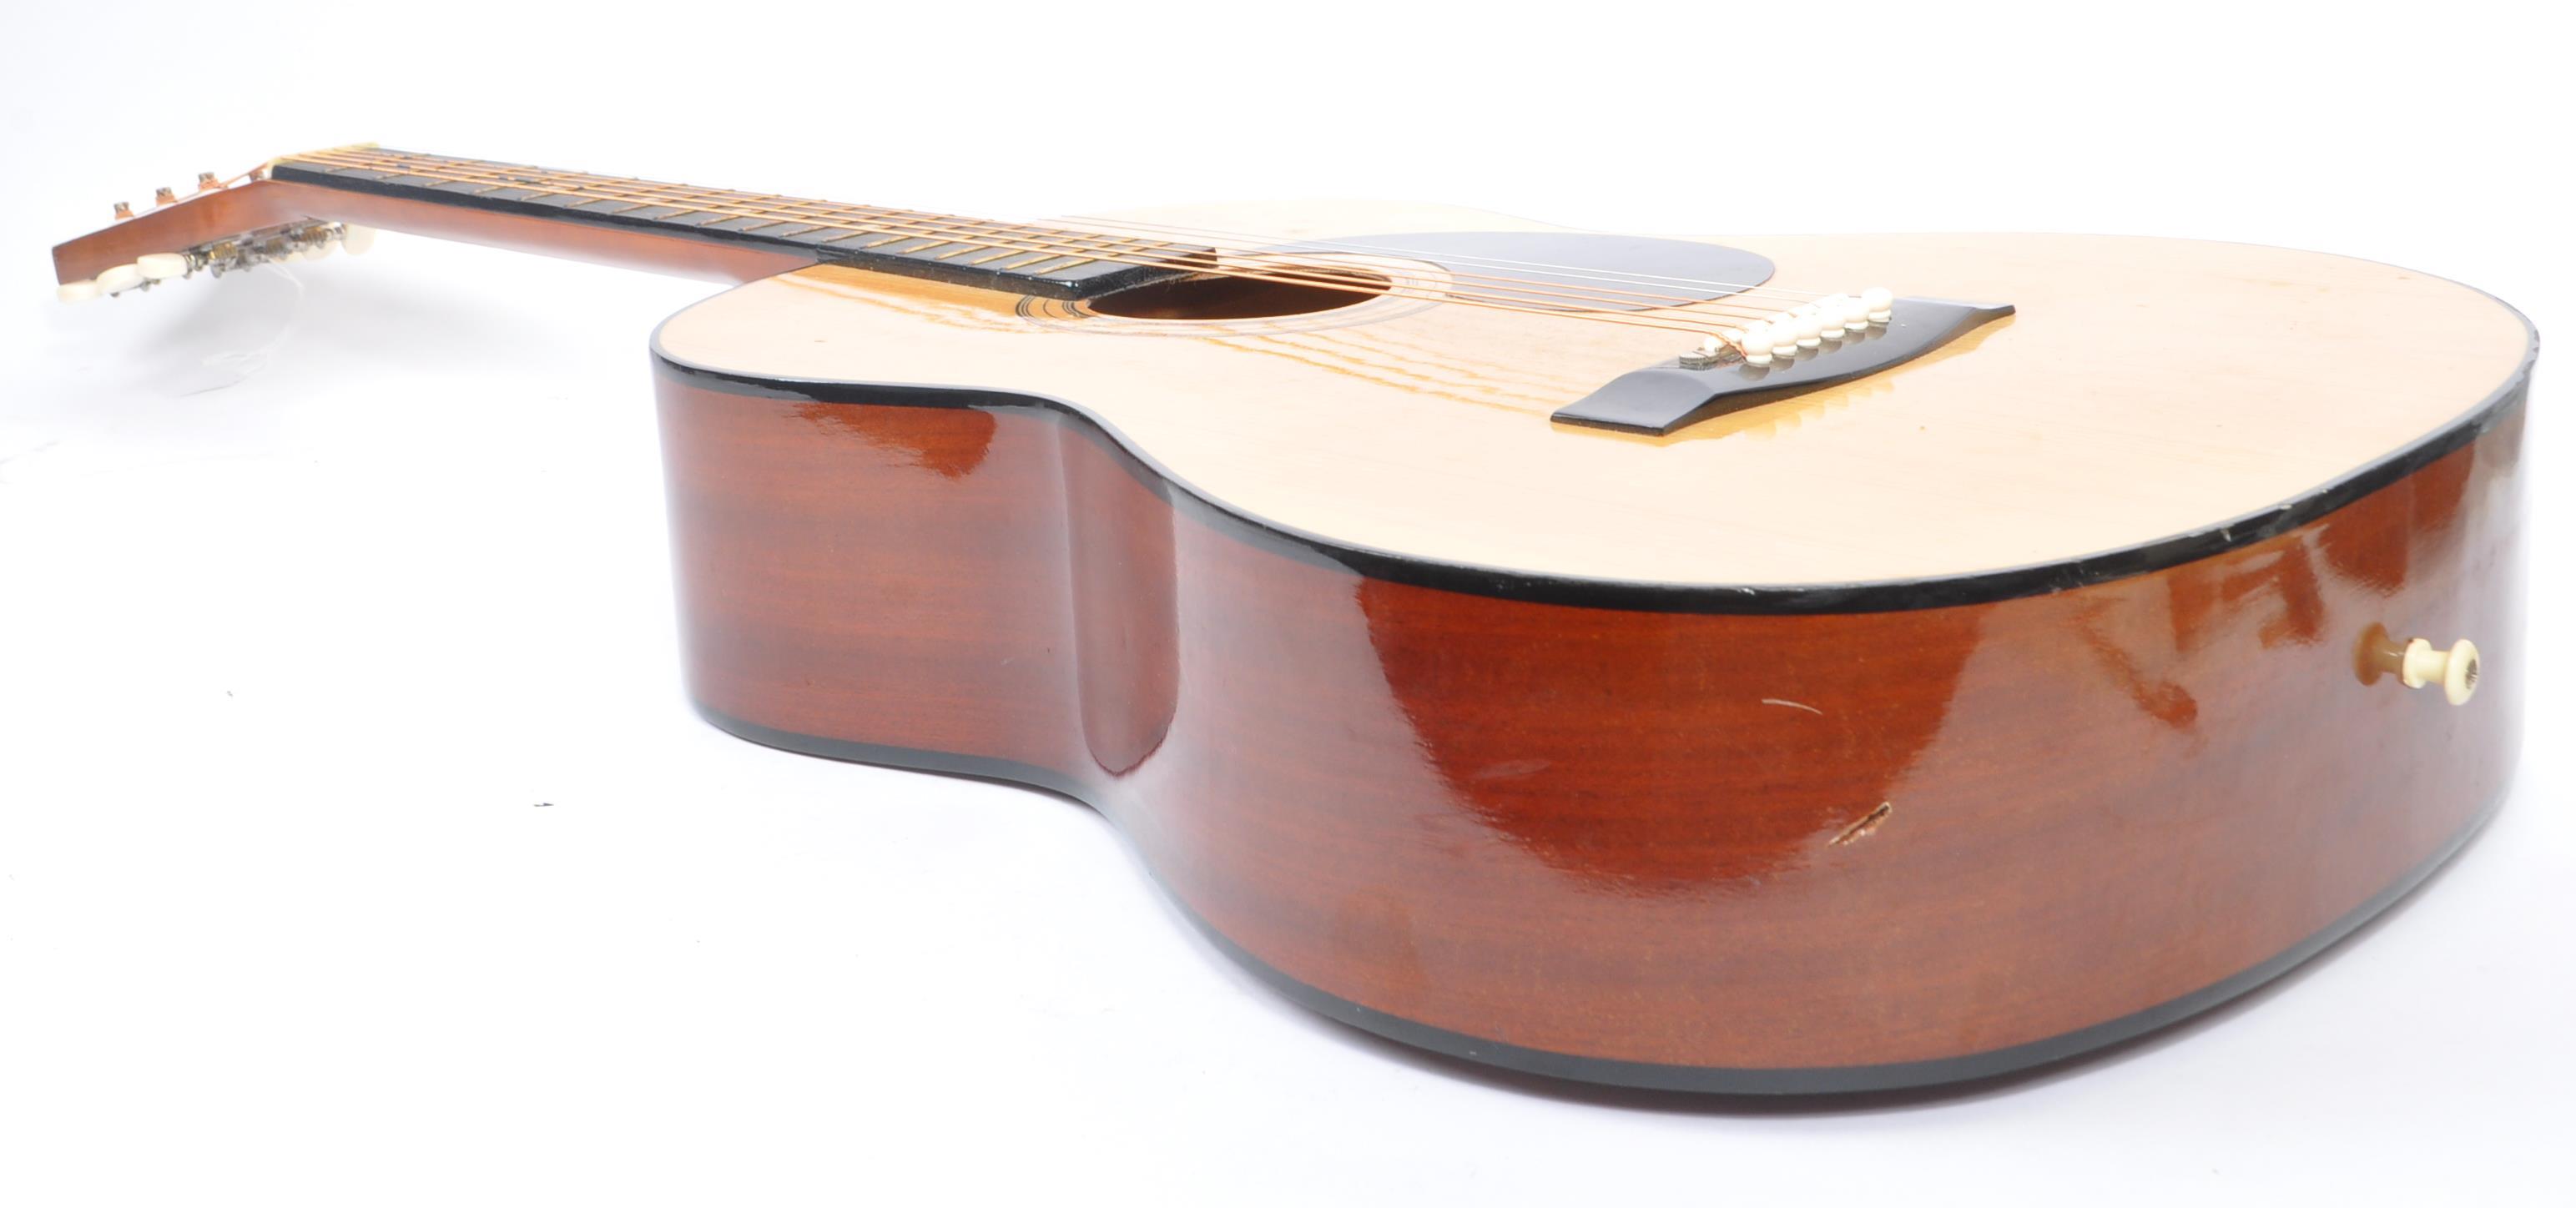 HOHNER - ACOUSTIC GUITAR MODEL NO. MW - 300 - Image 4 of 6